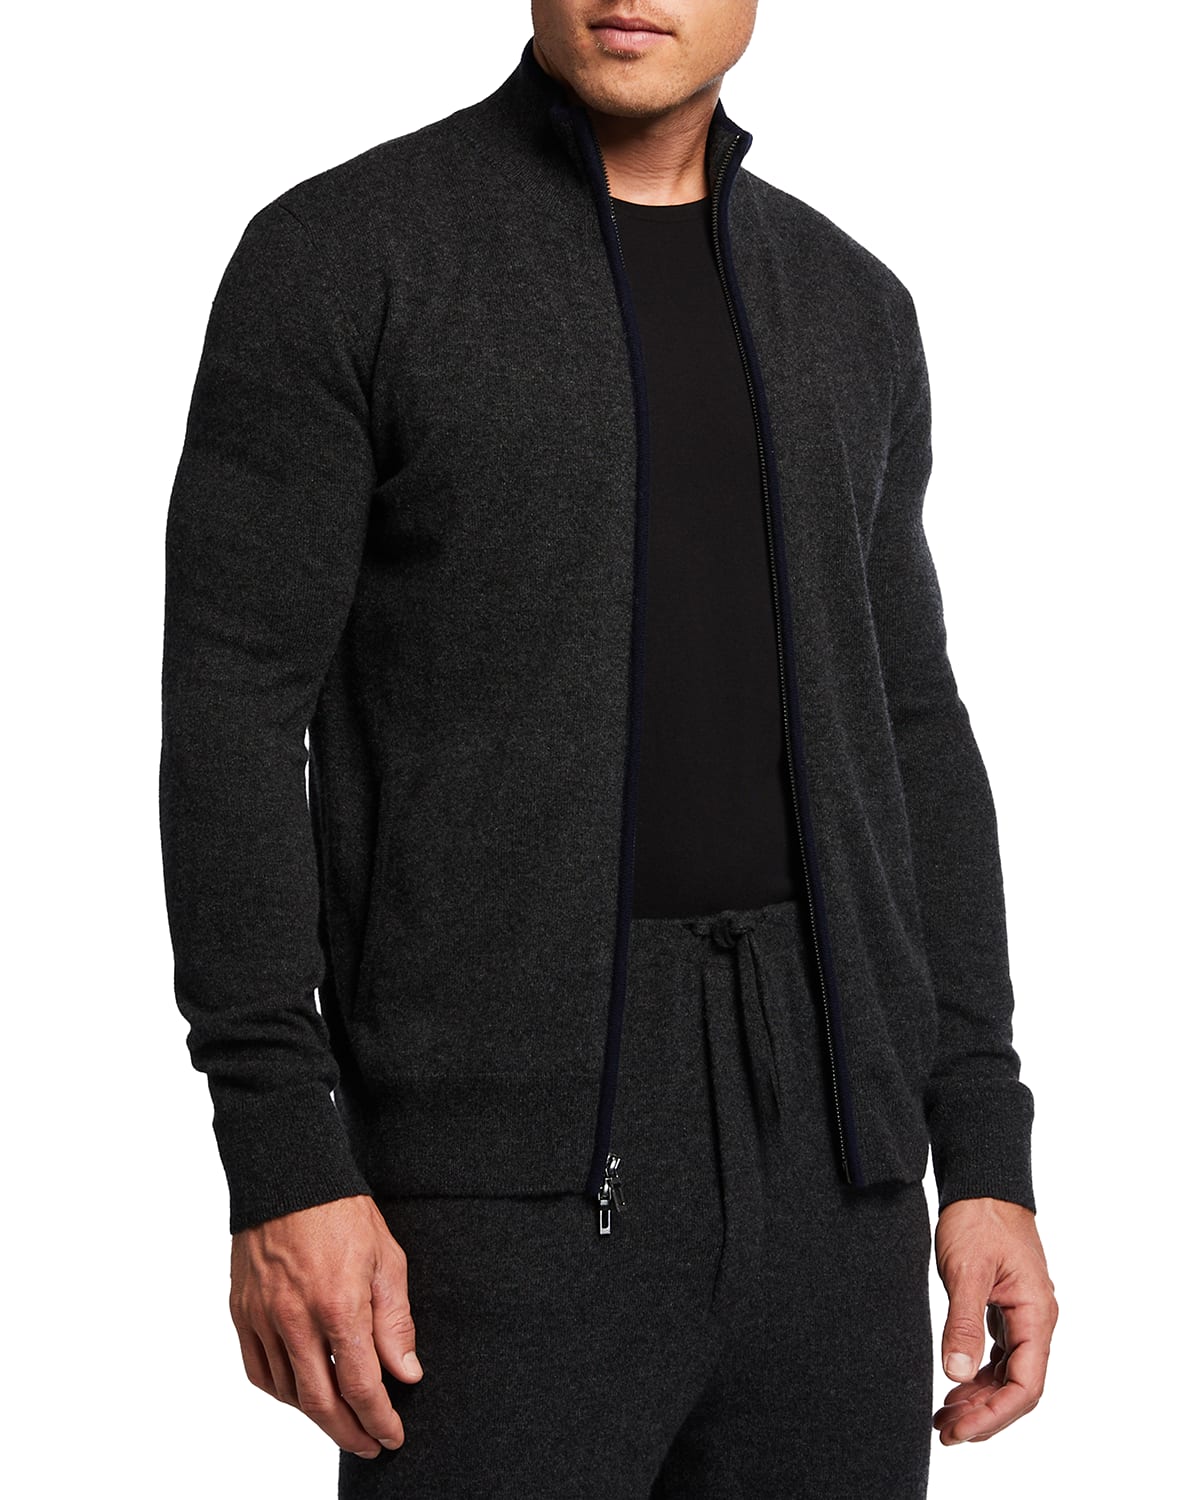 Men's Recycled Cashmere Full-Zip Sweater